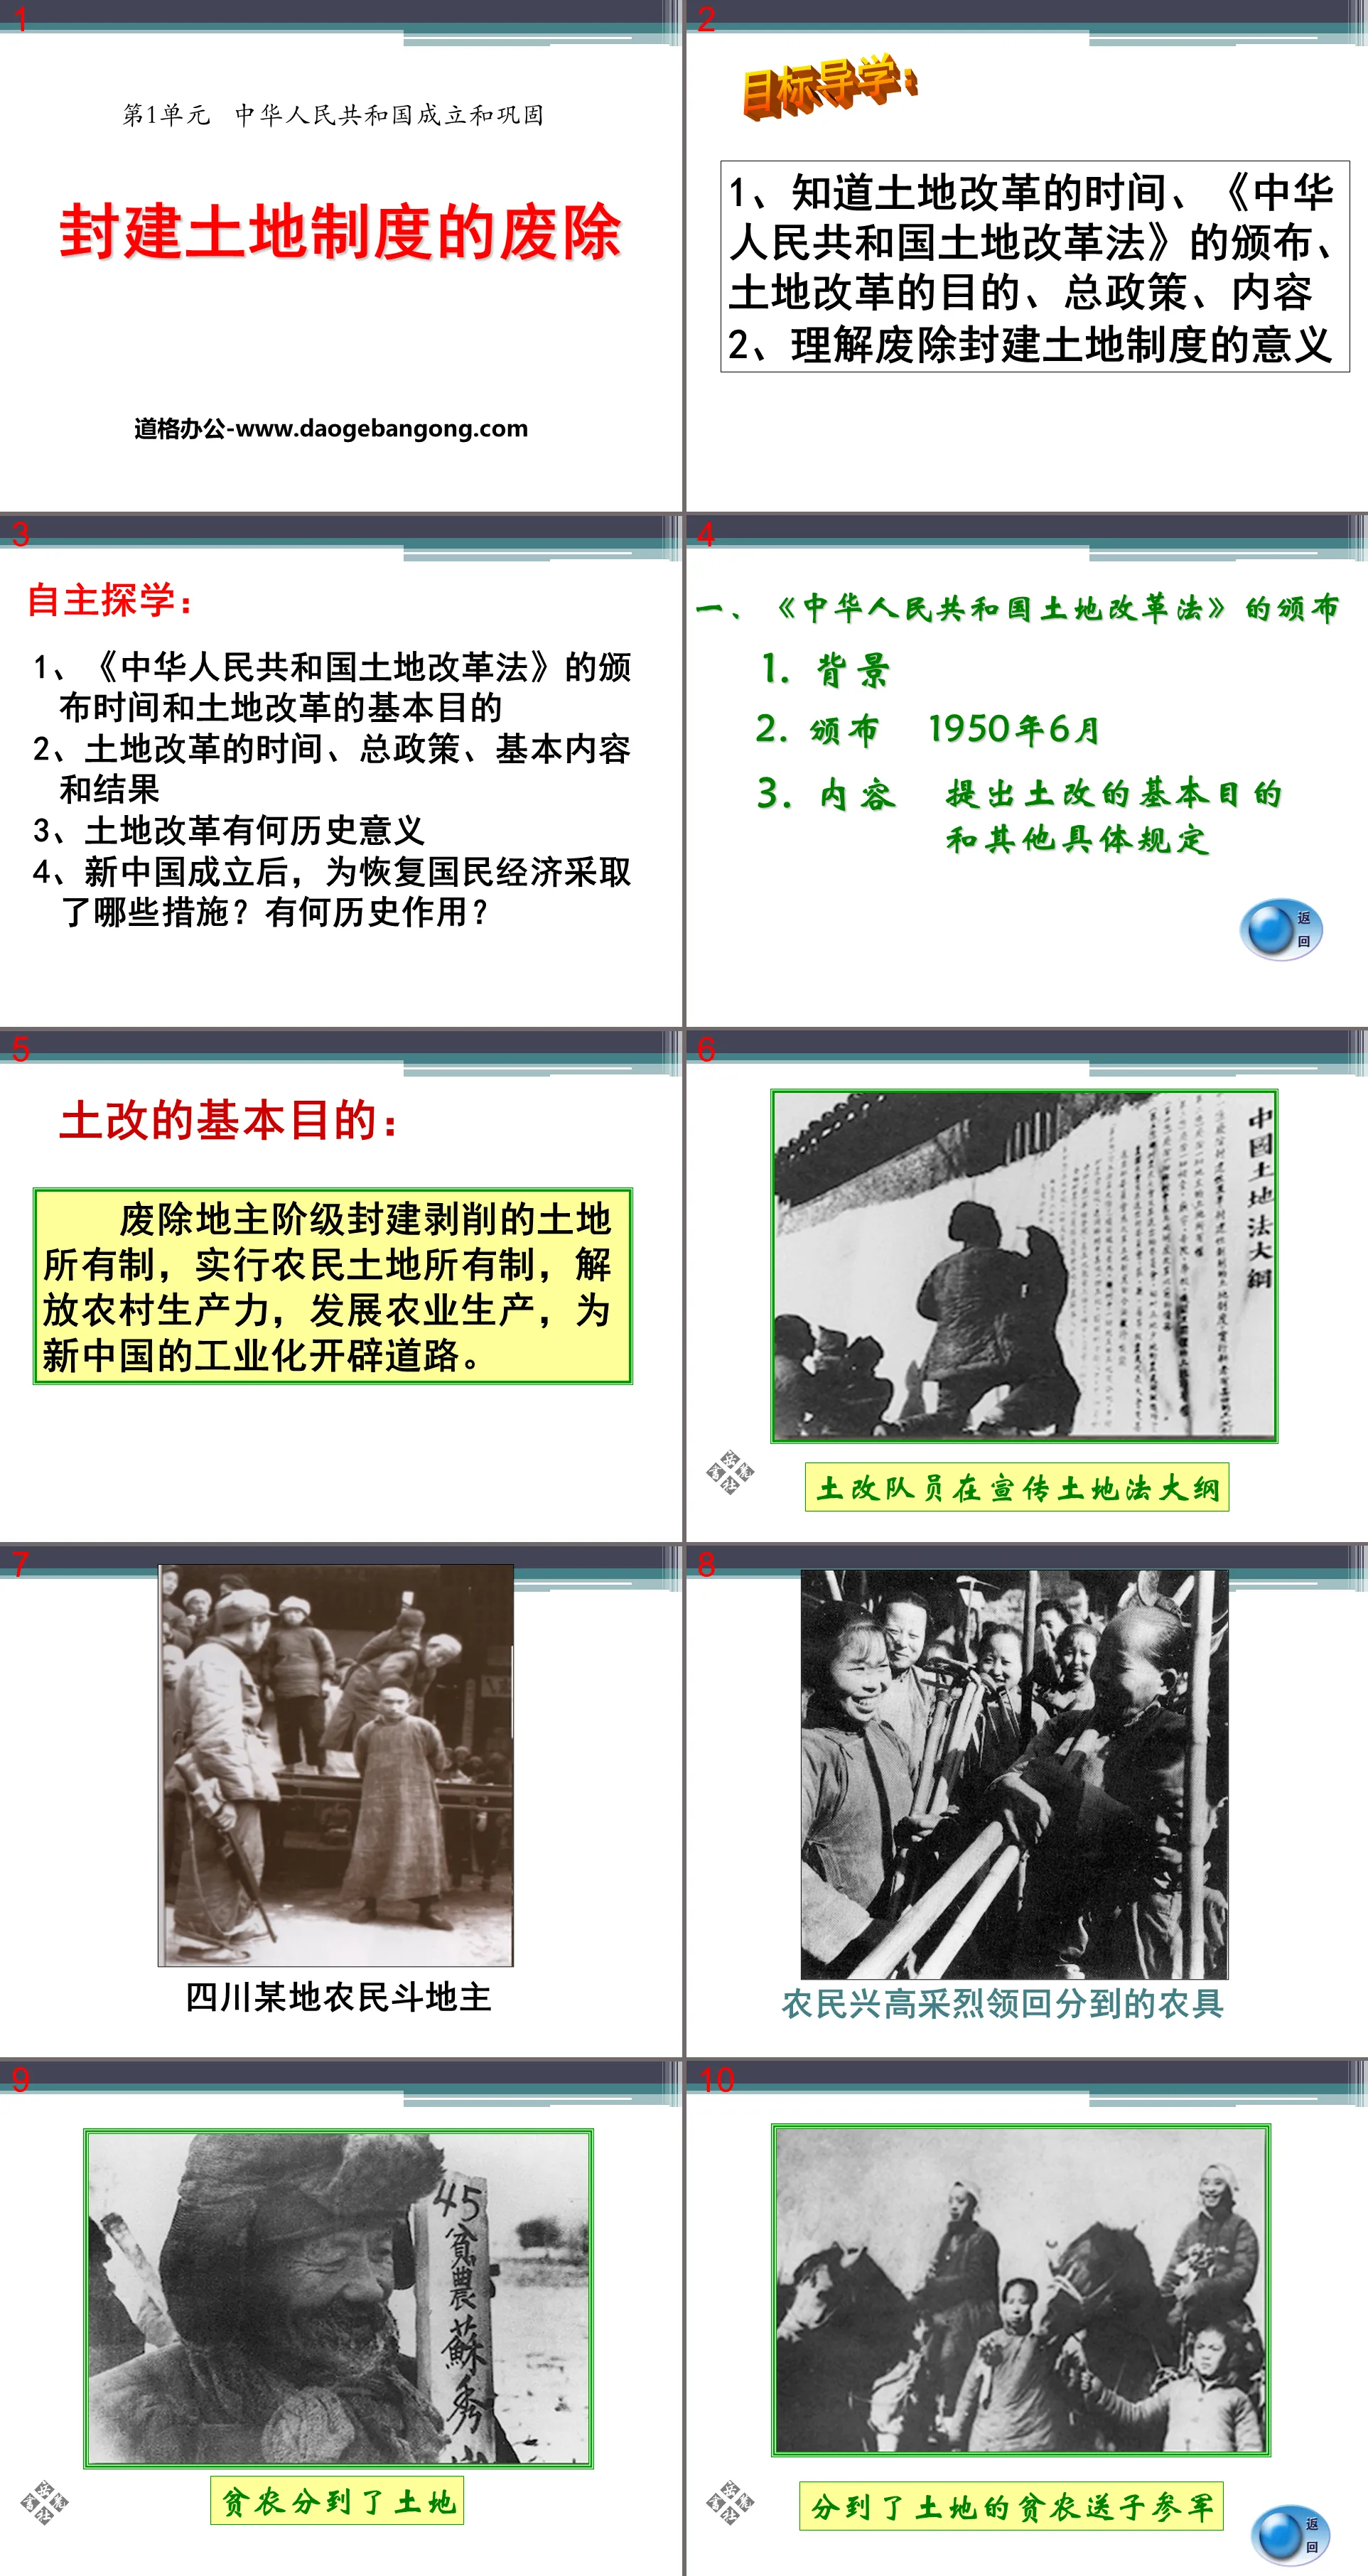 "The Abolition of the Feudal Land System" The Establishment and Consolidation of the People's Republic of China PPT Courseware 2